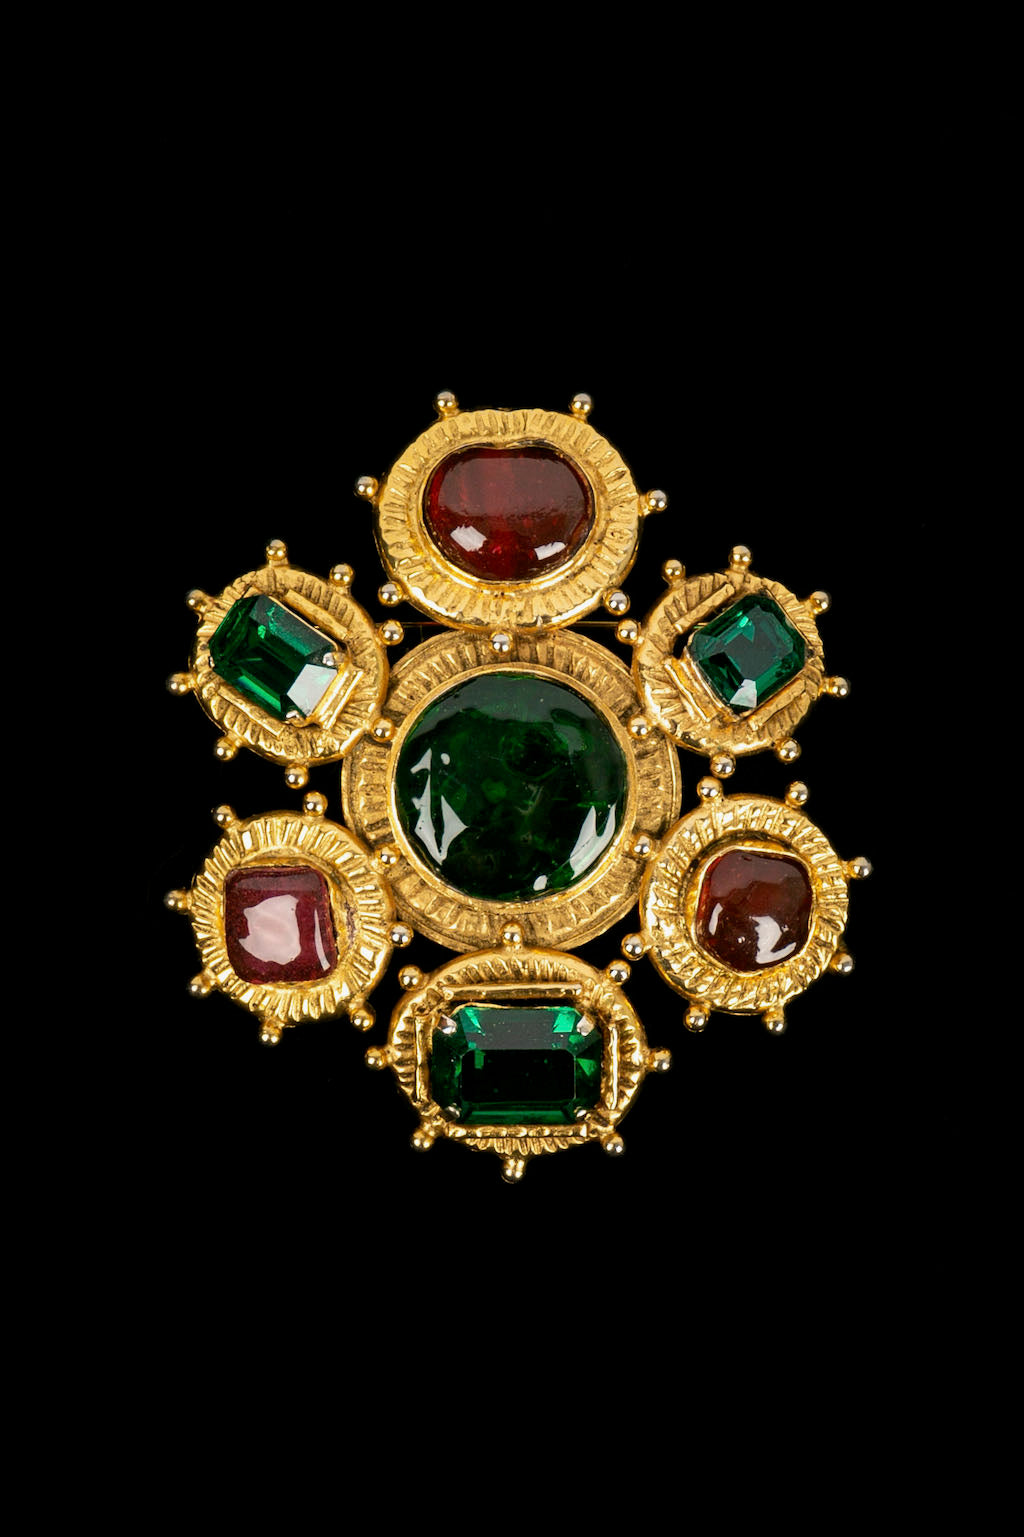 Chanel Brooches & Pins for Sale at Auction